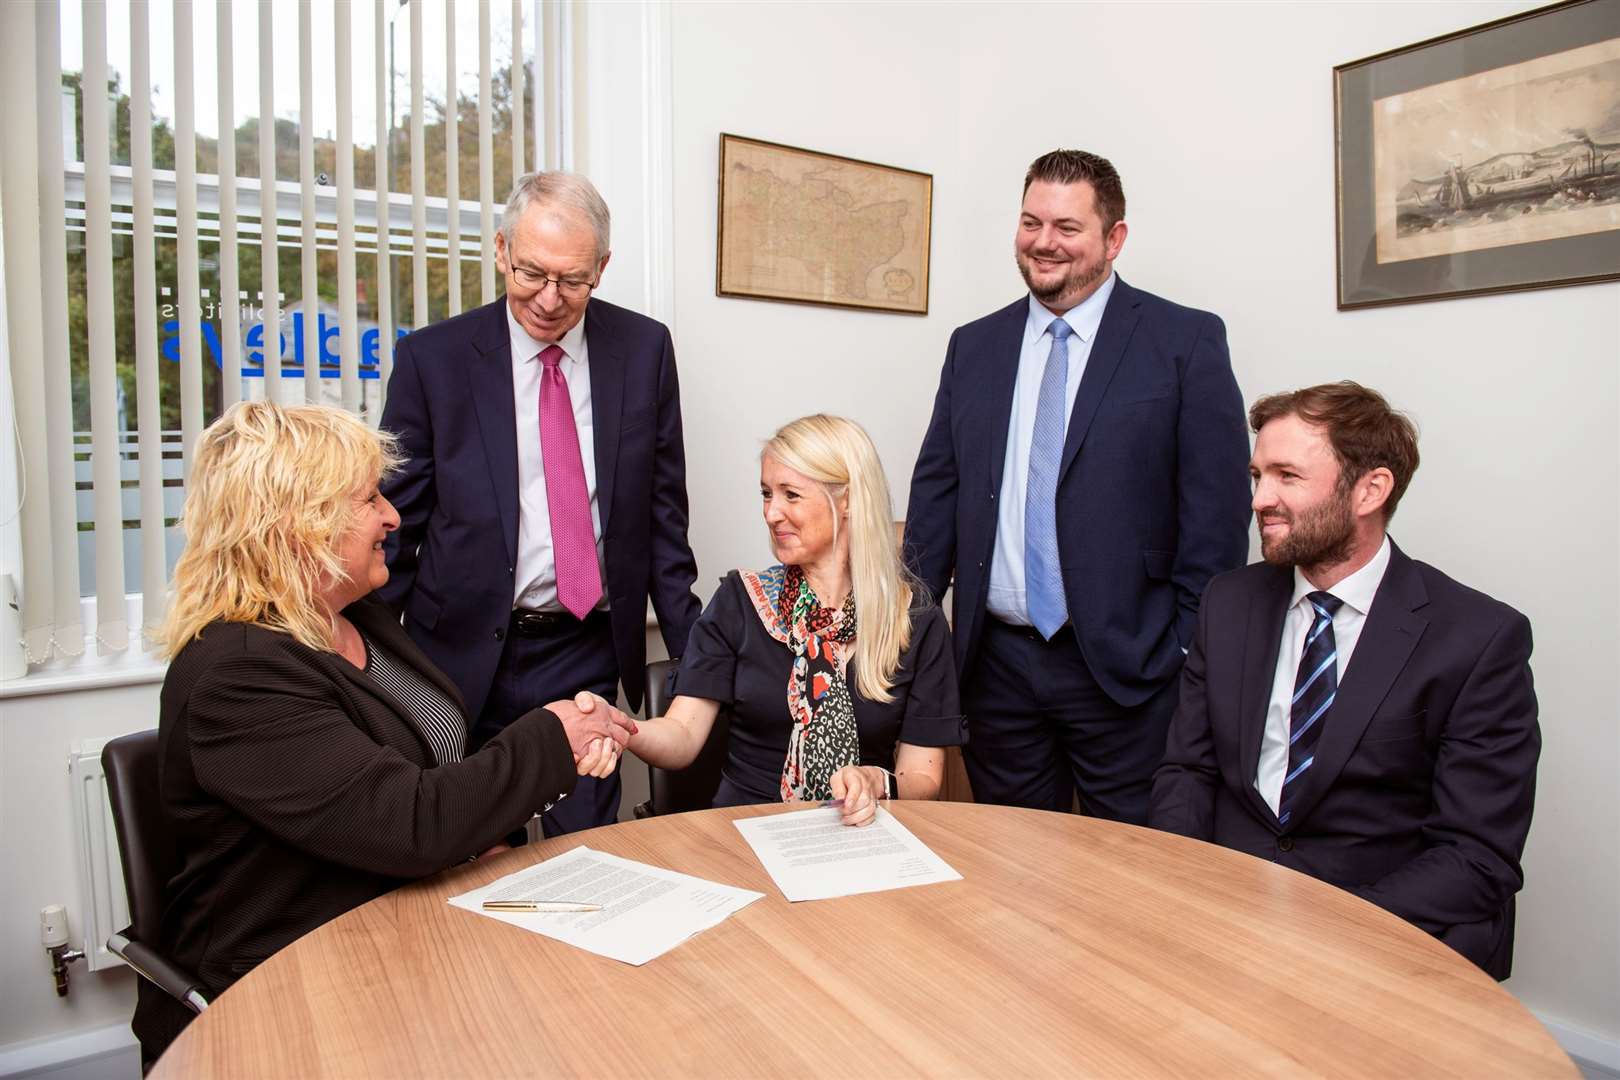 The deal is done: from left, Maureen Potts, Robert Green, Amy Judge, James Kent and Lachan Donaldson